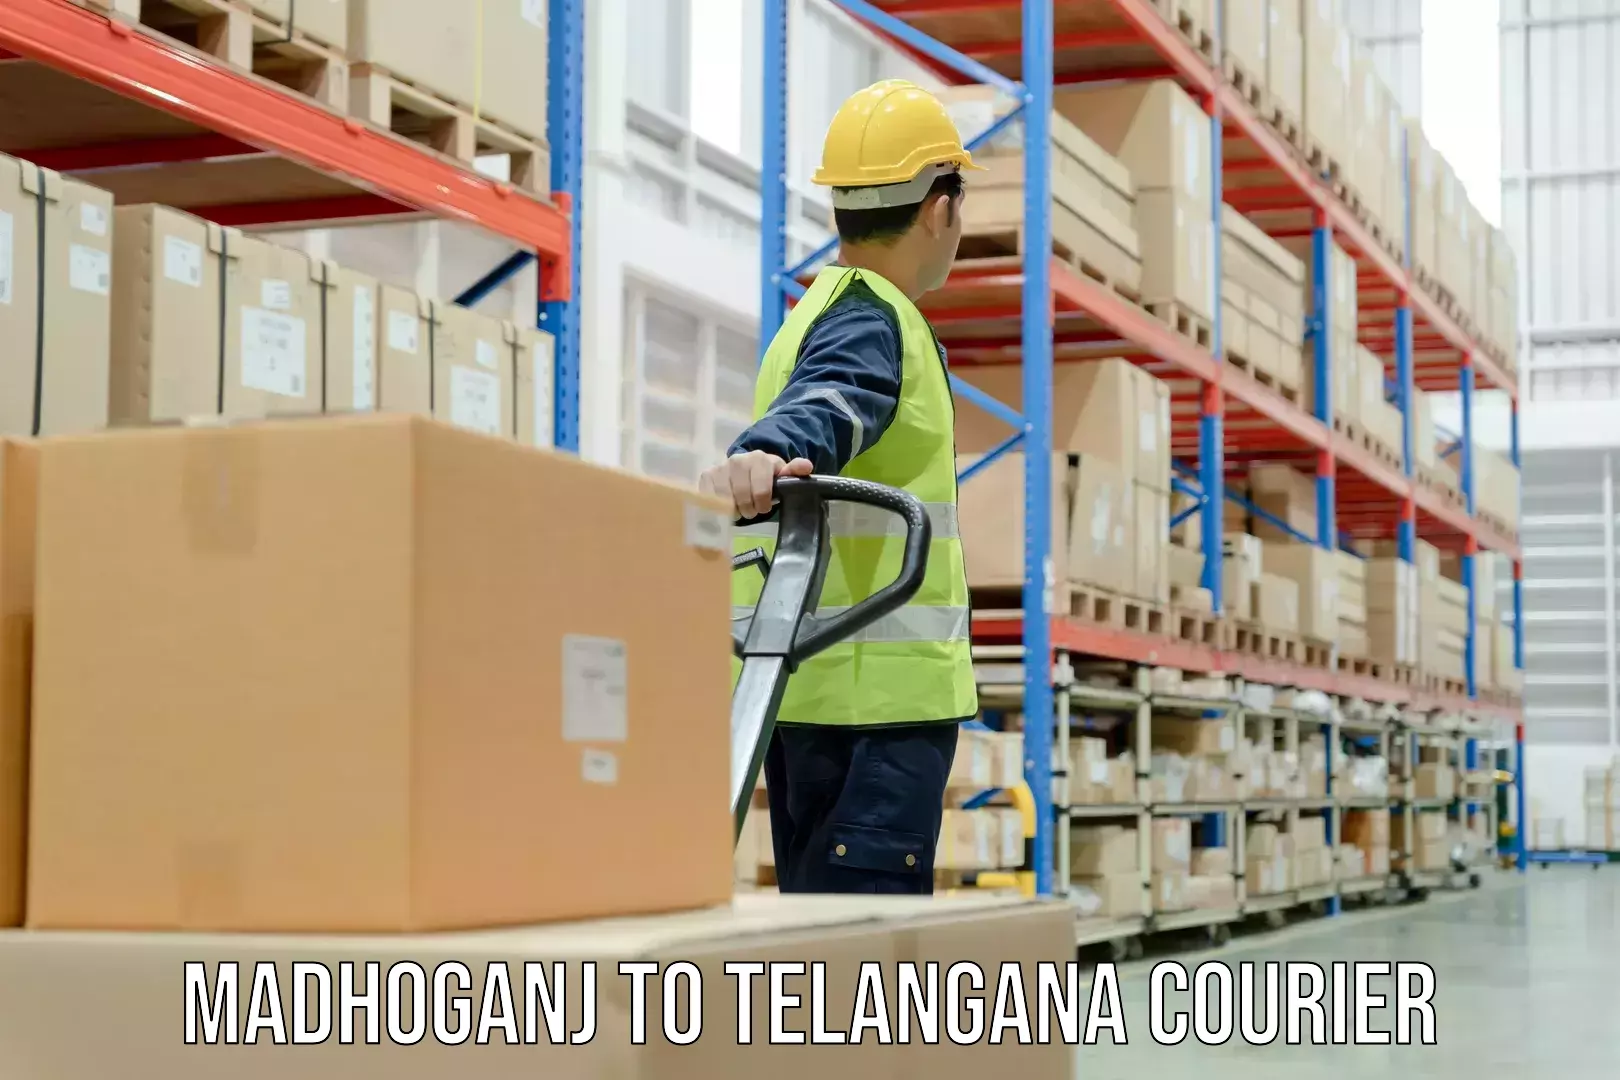 Efficient package consolidation Madhoganj to Sultanabad